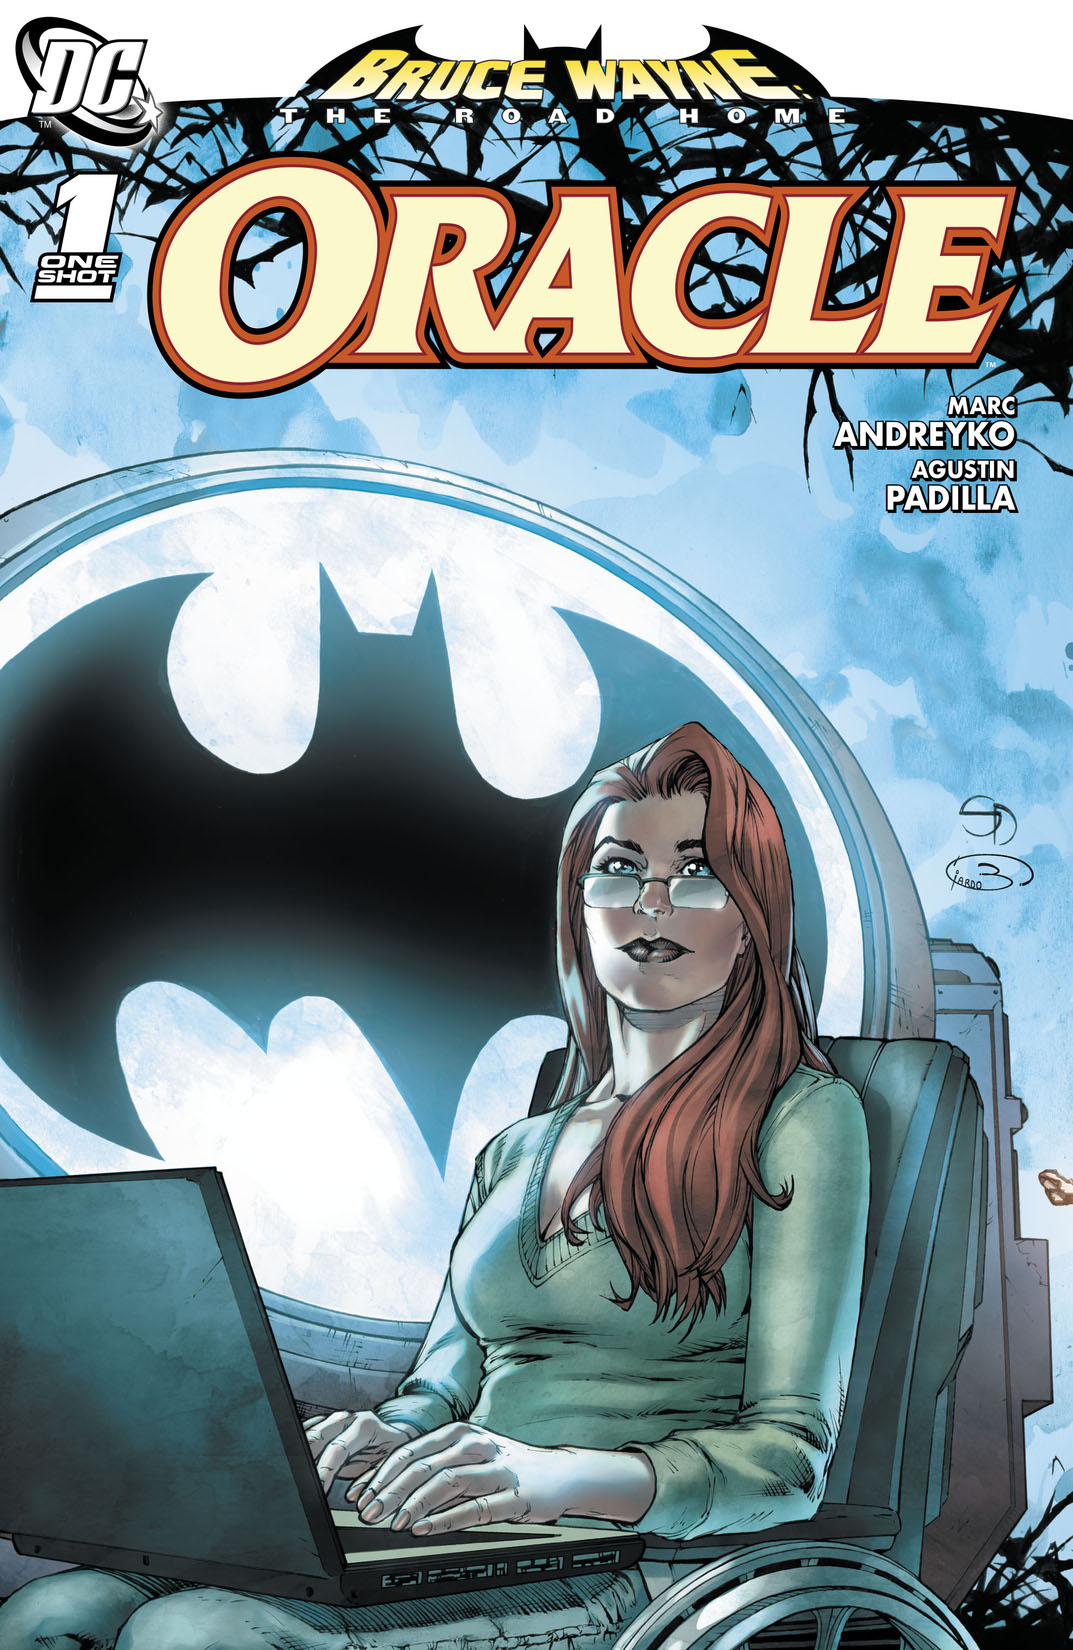 Bruce Wayne: The Road Home: Oracle #1 preview images